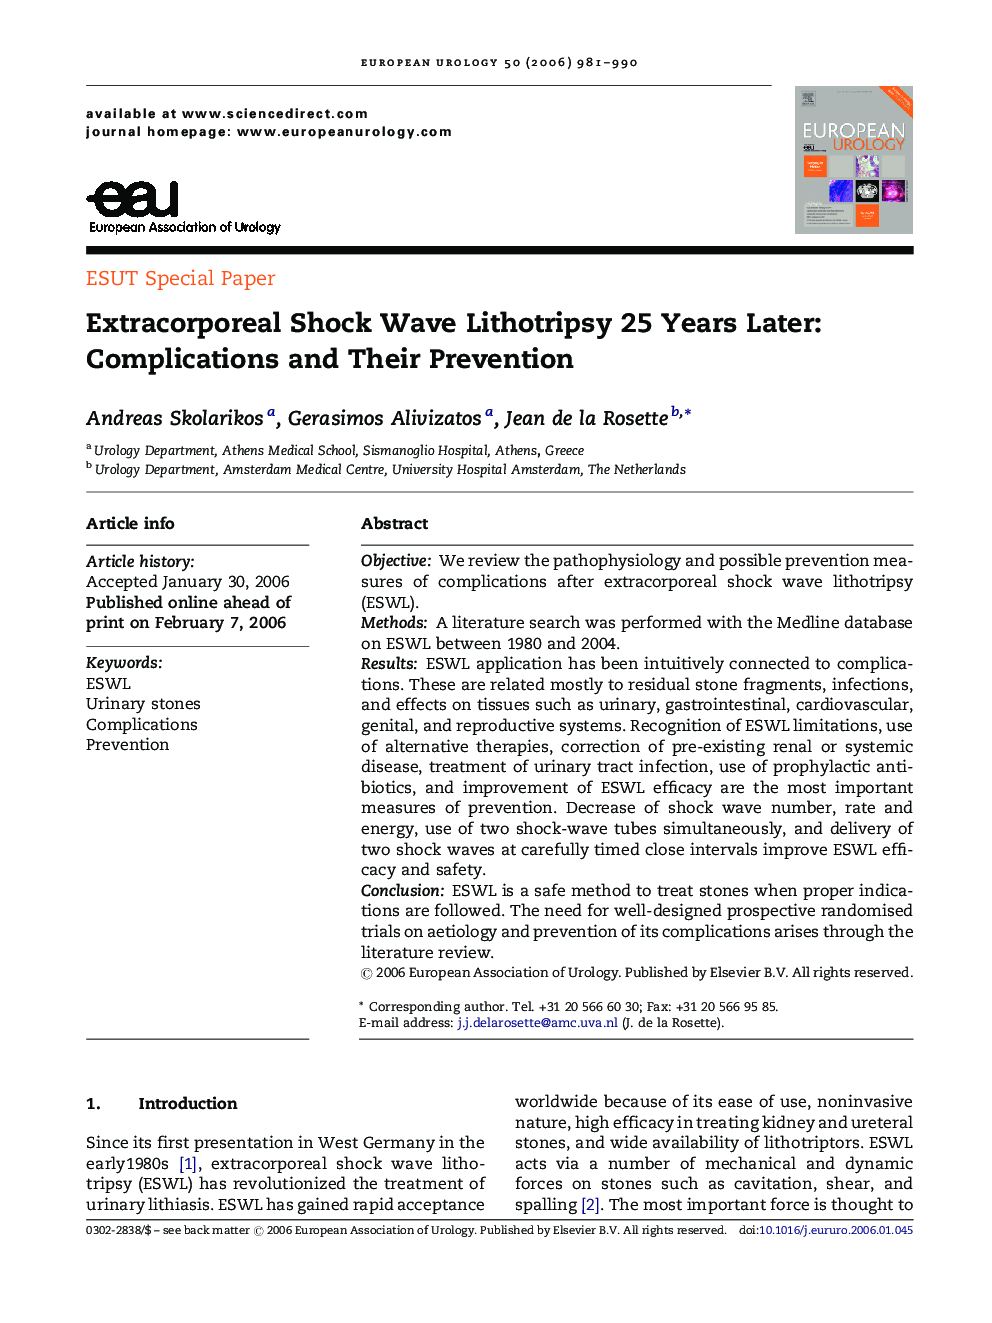 Extracorporeal Shock Wave Lithotripsy 25 Years Later: Complications and Their Prevention